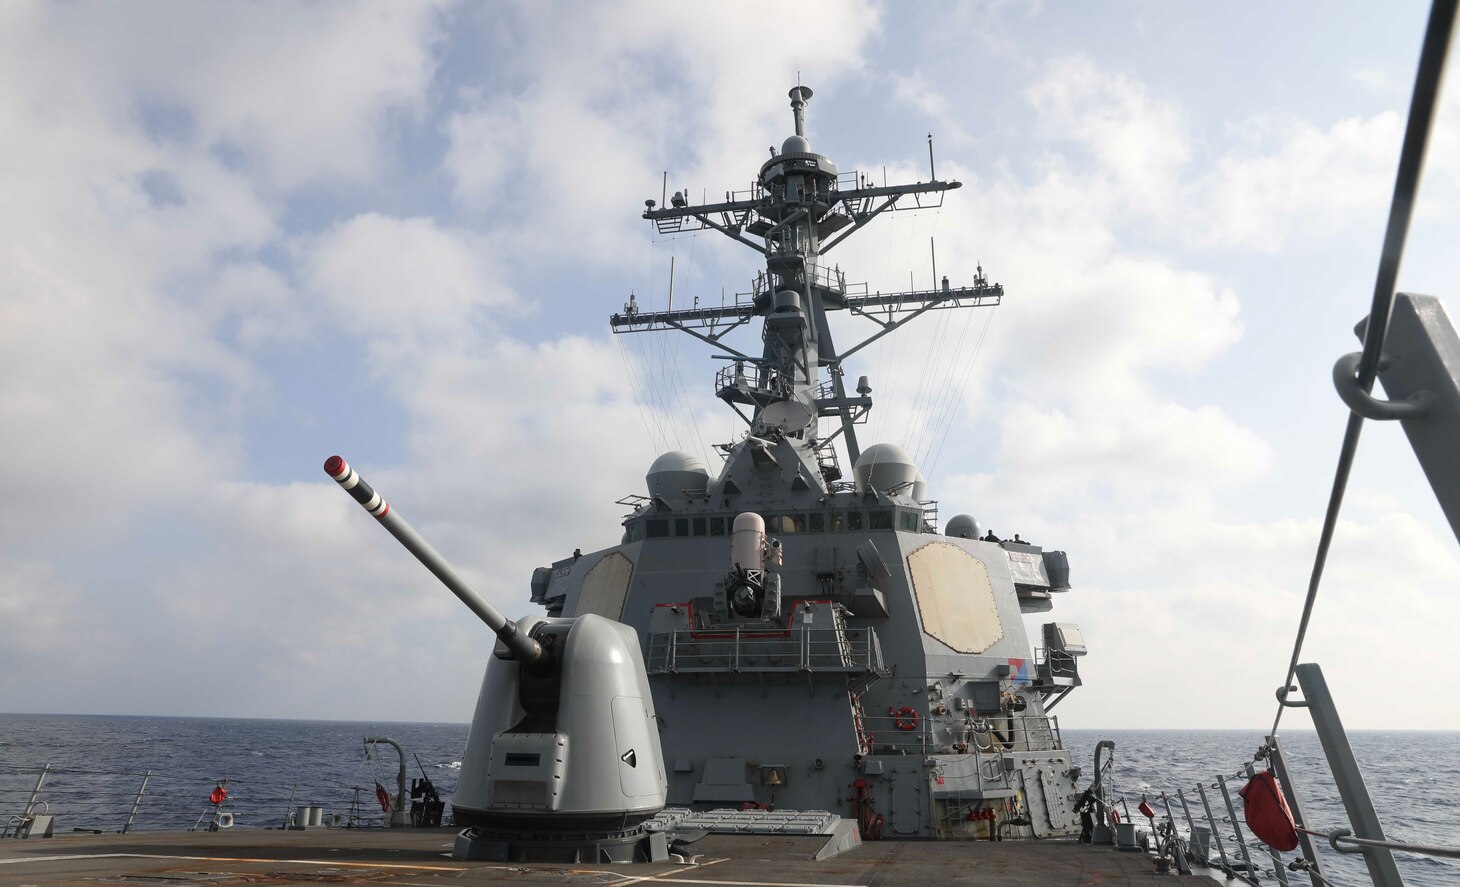 SOUTH CHINA SEA (March 24, 2023) – The Arleigh Burke-class guided-missile destroyer USS Milius (DDG 69) conducts a freedom of navigation operation in the South China Sea, March 24. Milius is forward-deployed to the U.S. 7th Fleet area of operations in support of a free and open Indo-Pacific. (U.S. Navy photo by Mass Communication Specialist 1st Class Greg Johnson)